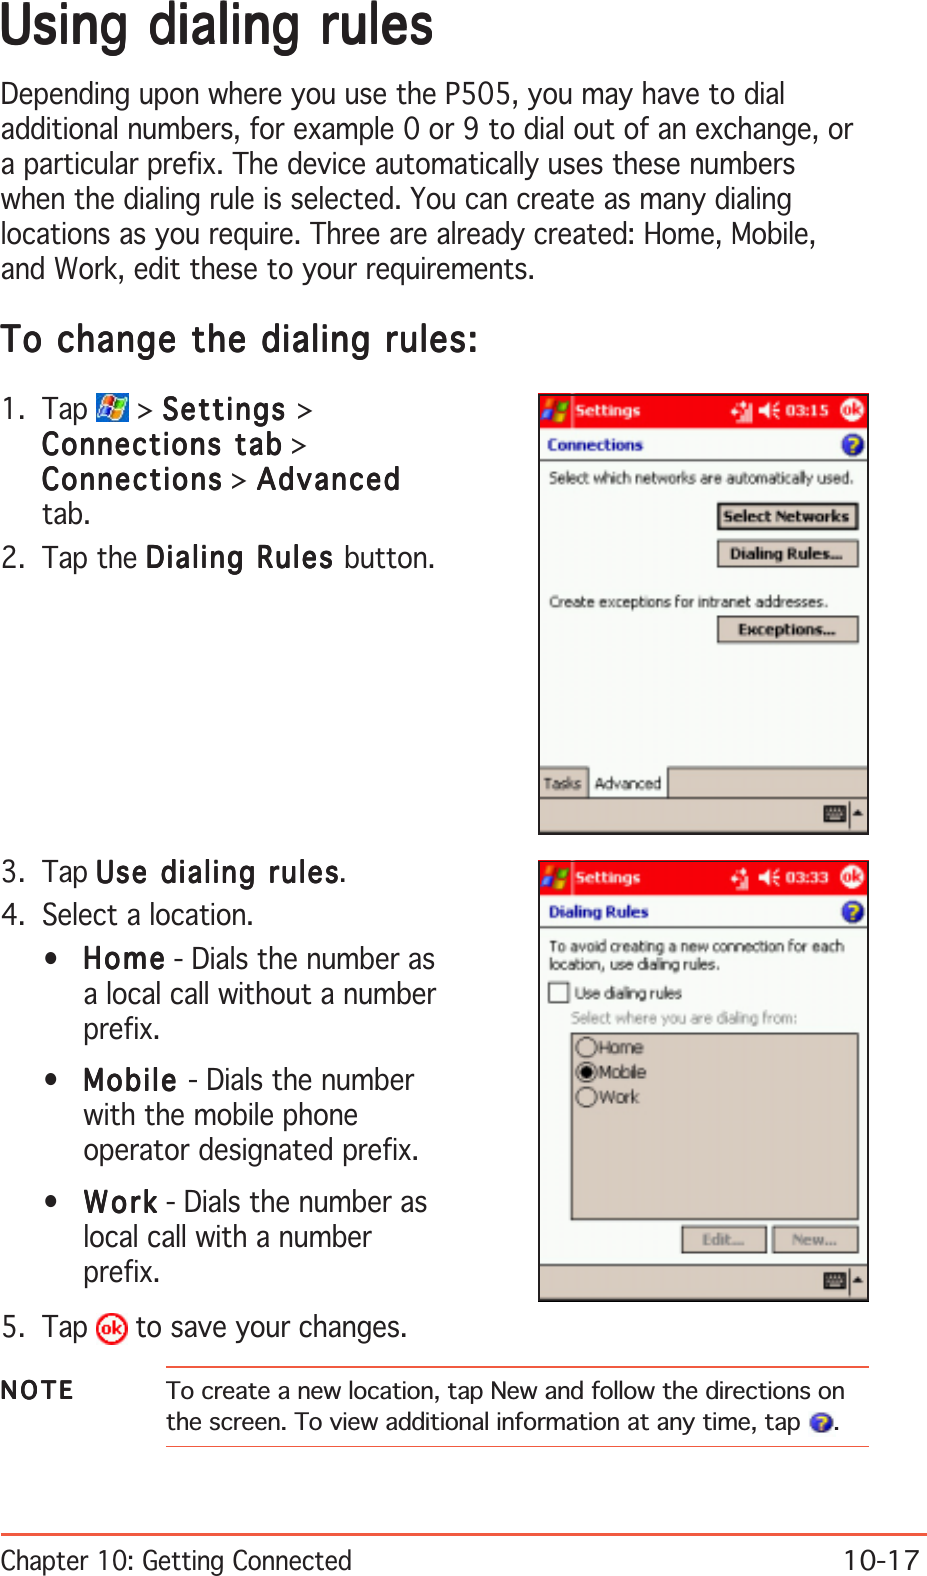 Chapter 10: Getting Connected10-17Using dialing rulesUsing dialing rulesUsing dialing rulesUsing dialing rulesUsing dialing rulesDepending upon where you use the P505, you may have to dialadditional numbers, for example 0 or 9 to dial out of an exchange, ora particular prefix. The device automatically uses these numberswhen the dialing rule is selected. You can create as many dialinglocations as you require. Three are already created: Home, Mobile,and Work, edit these to your requirements.To change the dialing rules:To change the dialing rules:To change the dialing rules:To change the dialing rules:To change the dialing rules:1. Tap   &gt; SettingsSettingsSettingsSettingsSettings &gt;Connections tabConnections tabConnections tabConnections tabConnections tab &gt;ConnectionsConnectionsConnectionsConnectionsConnections &gt; AdvancedAdvancedAdvancedAdvancedAdvancedtab.2. Tap the Dialing Rules Dialing Rules Dialing Rules Dialing Rules Dialing Rules button.3. Tap Use dialing rulesUse dialing rulesUse dialing rulesUse dialing rulesUse dialing rules.4. Select a location.•HomeHomeHomeHomeHo m e - Dials the number asa local call without a numberprefix.•MobileMobileMobileMobileMobile - Dials the numberwith the mobile phoneoperator designated prefix.•WorkWorkWorkWorkW or k - Dials the number aslocal call with a numberprefix.5. Tap   to save your changes.NOTENOTENOTENOTEN O T E To create a new location, tap New and follow the directions onthe screen. To view additional information at any time, tap  .